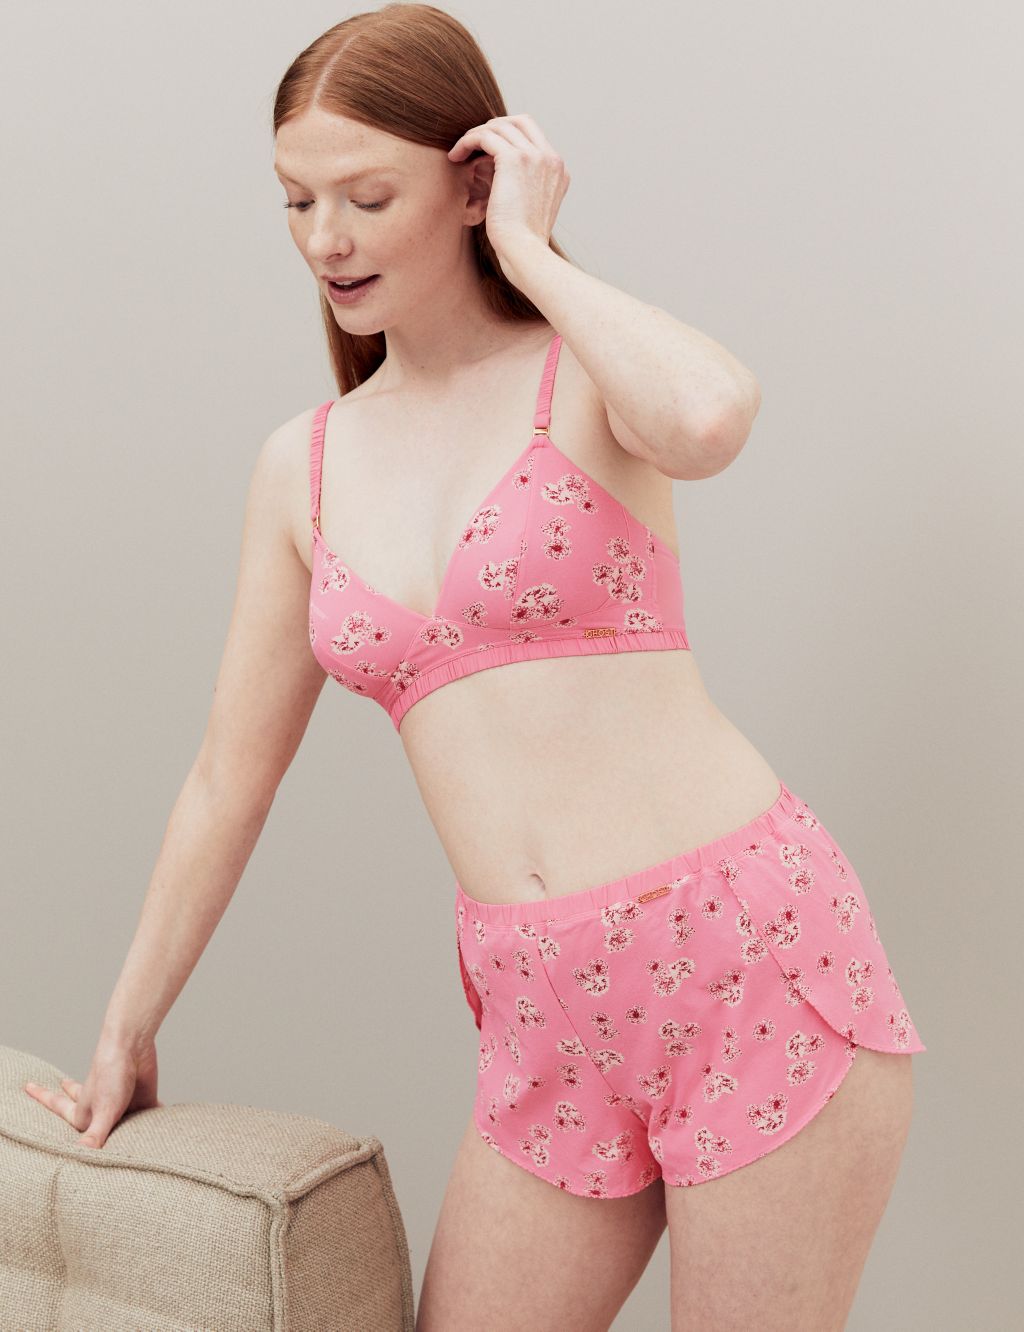 Floral Print High Waisted French Knickers image 4